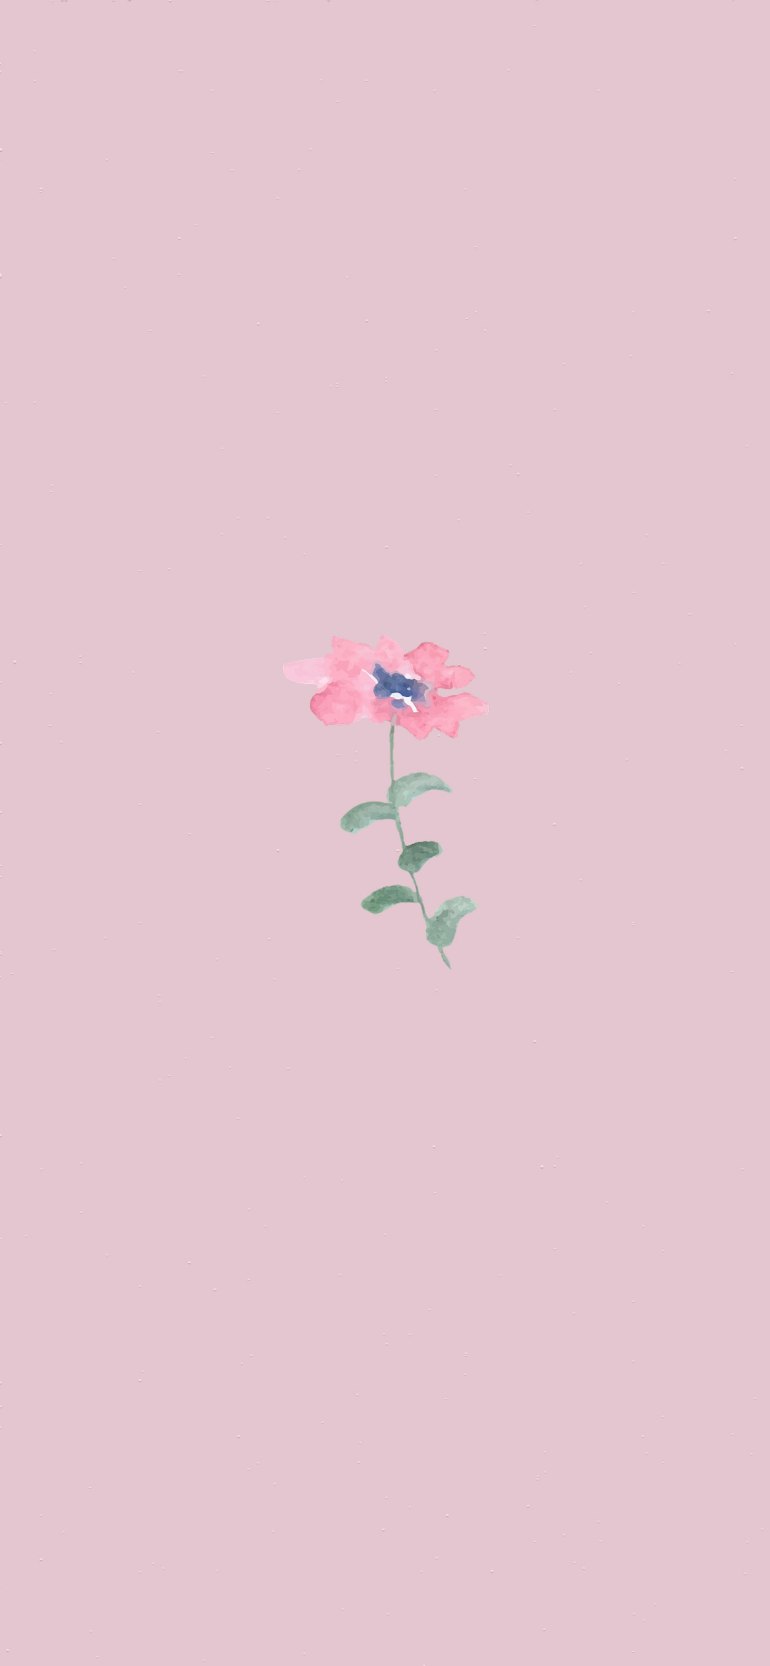 Pink Aesthetic Picture, Pink Flower Wallpaper